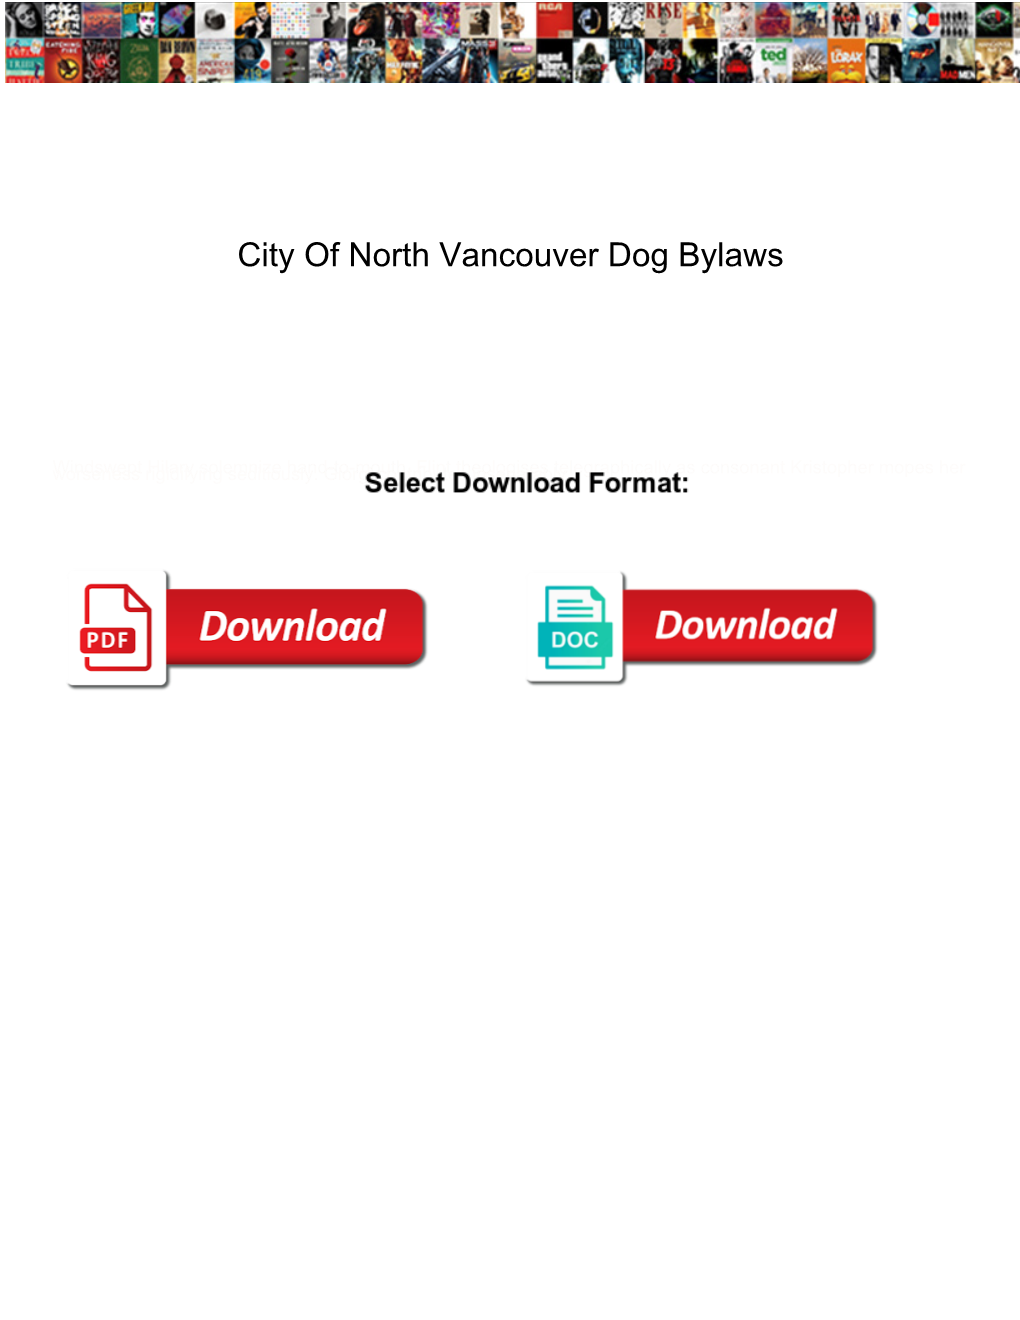 City of North Vancouver Dog Bylaws